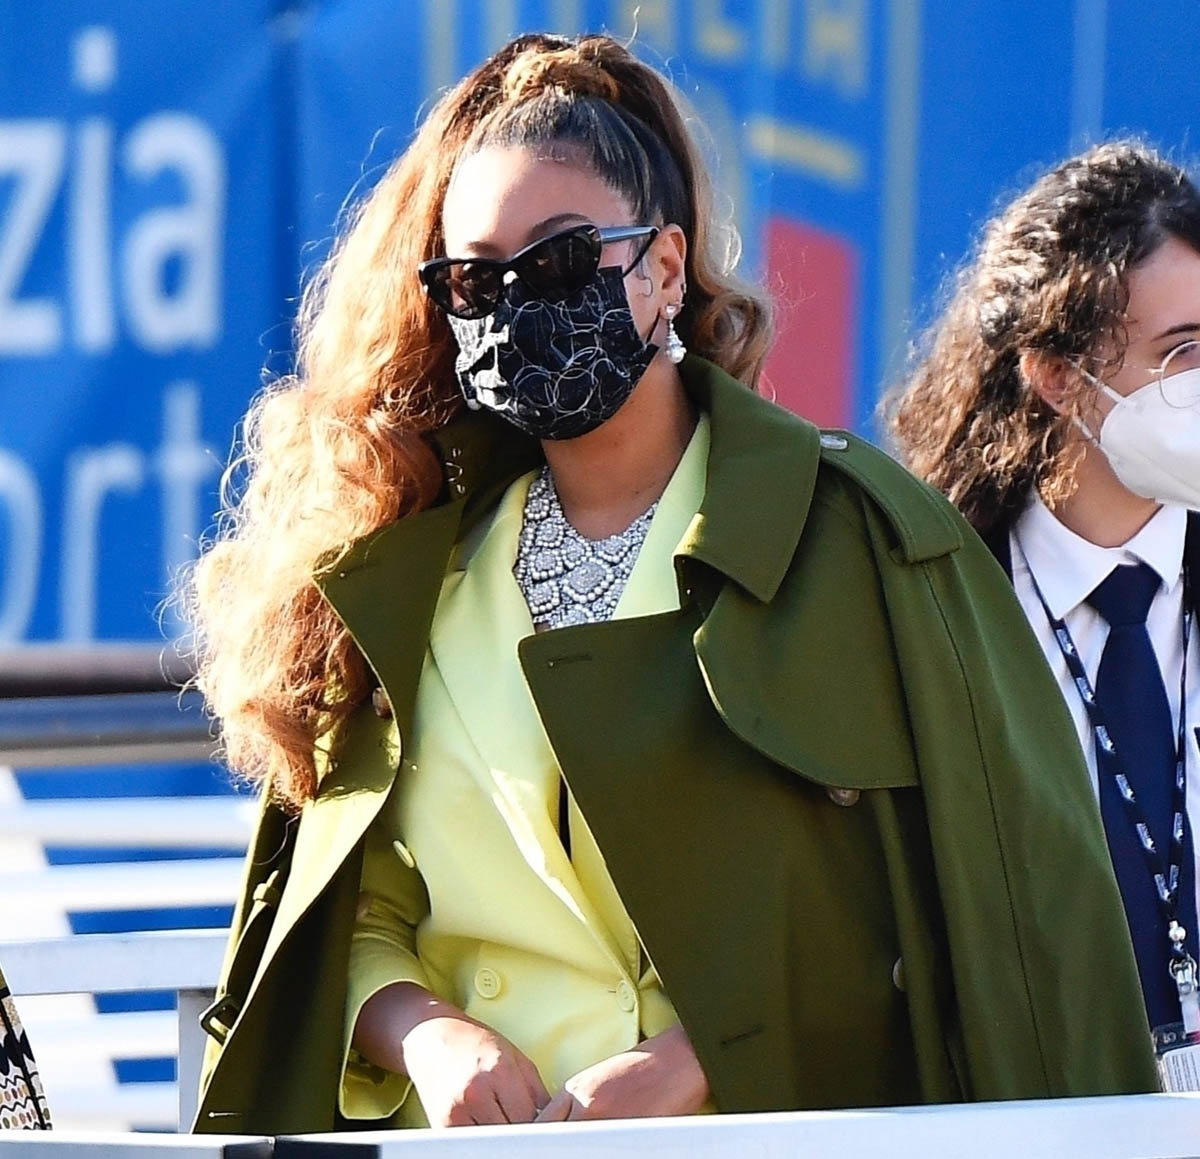 Masked Beyoncé attends Alexandre Arnault's star studded wedding with Jay-Z  in Italy